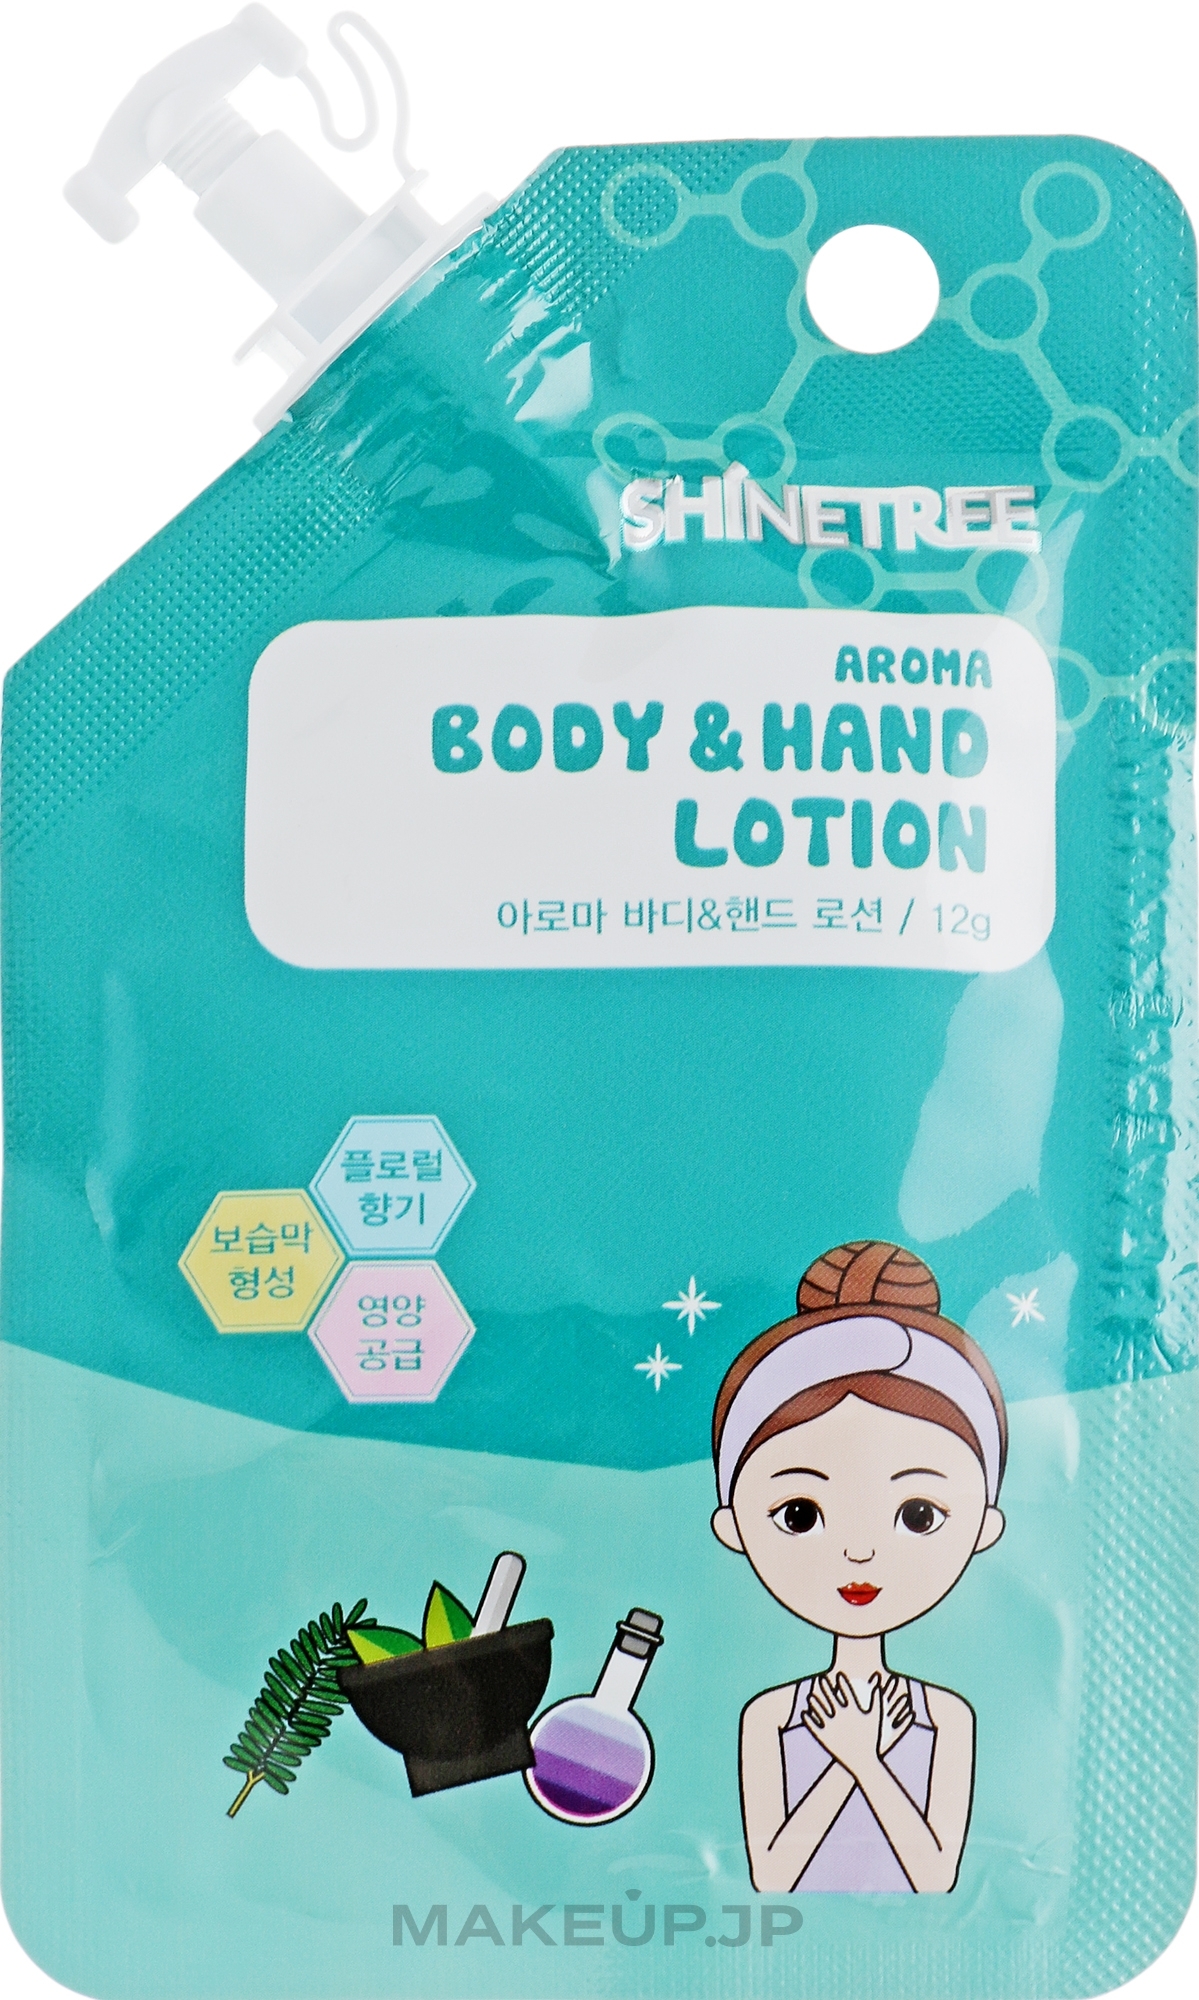 Body & Hand Lotion - Shinetree Body and Hand Lotion — photo 12 g